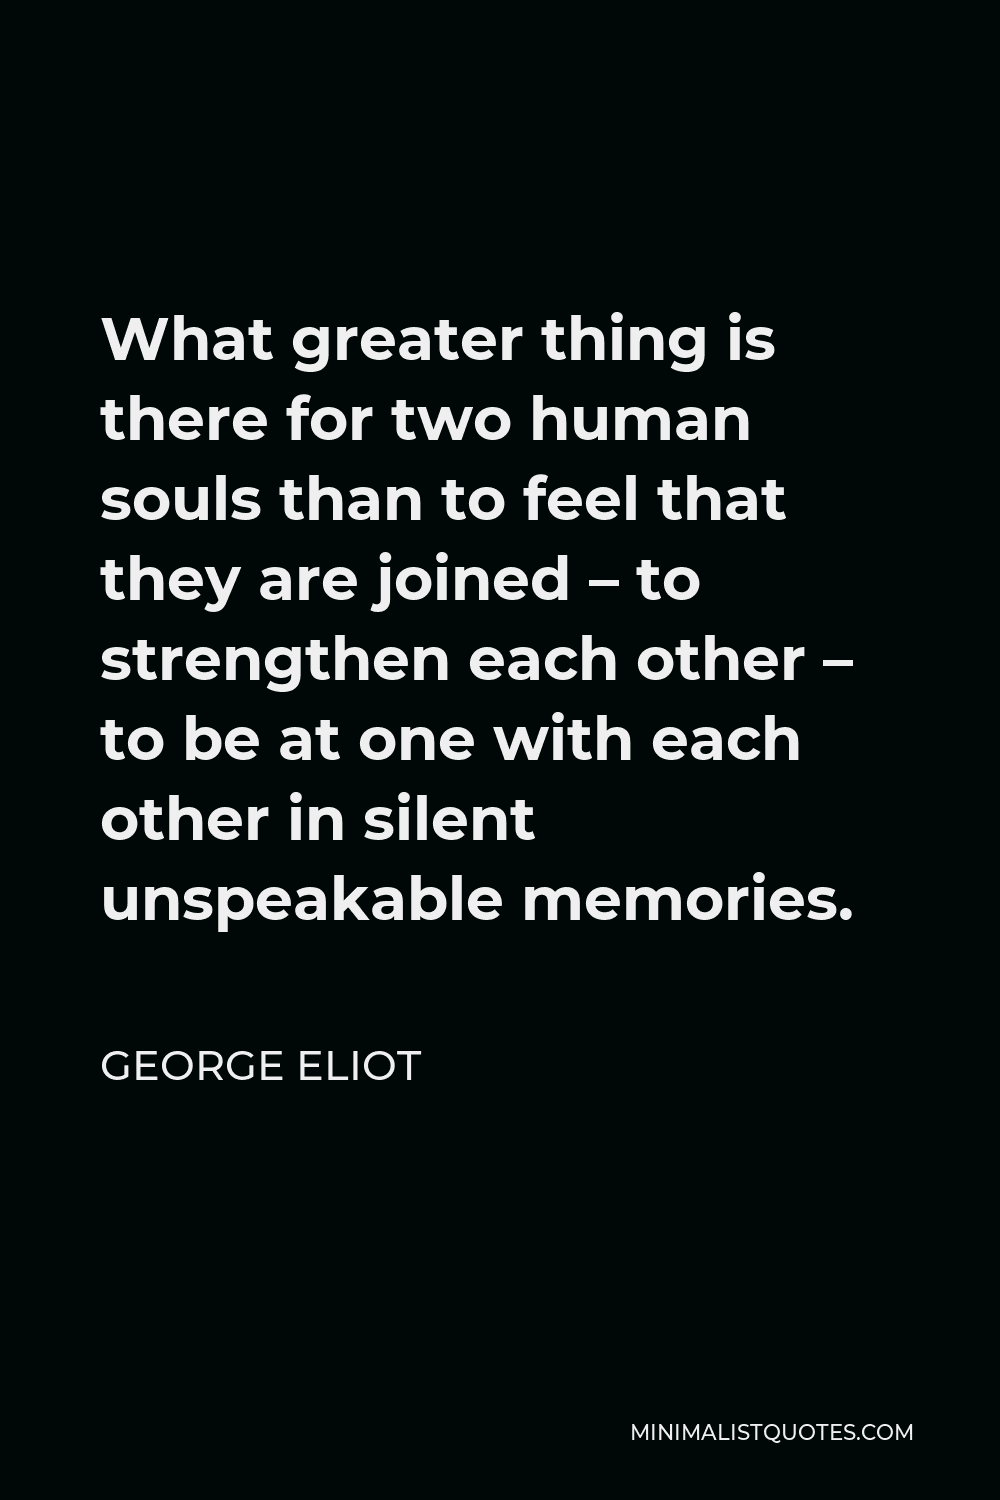 George Eliot Quote - What greater thing is there for two human souls than to feel that they are joined – to strengthen each other – to be at one with each other in silent unspeakable memories.